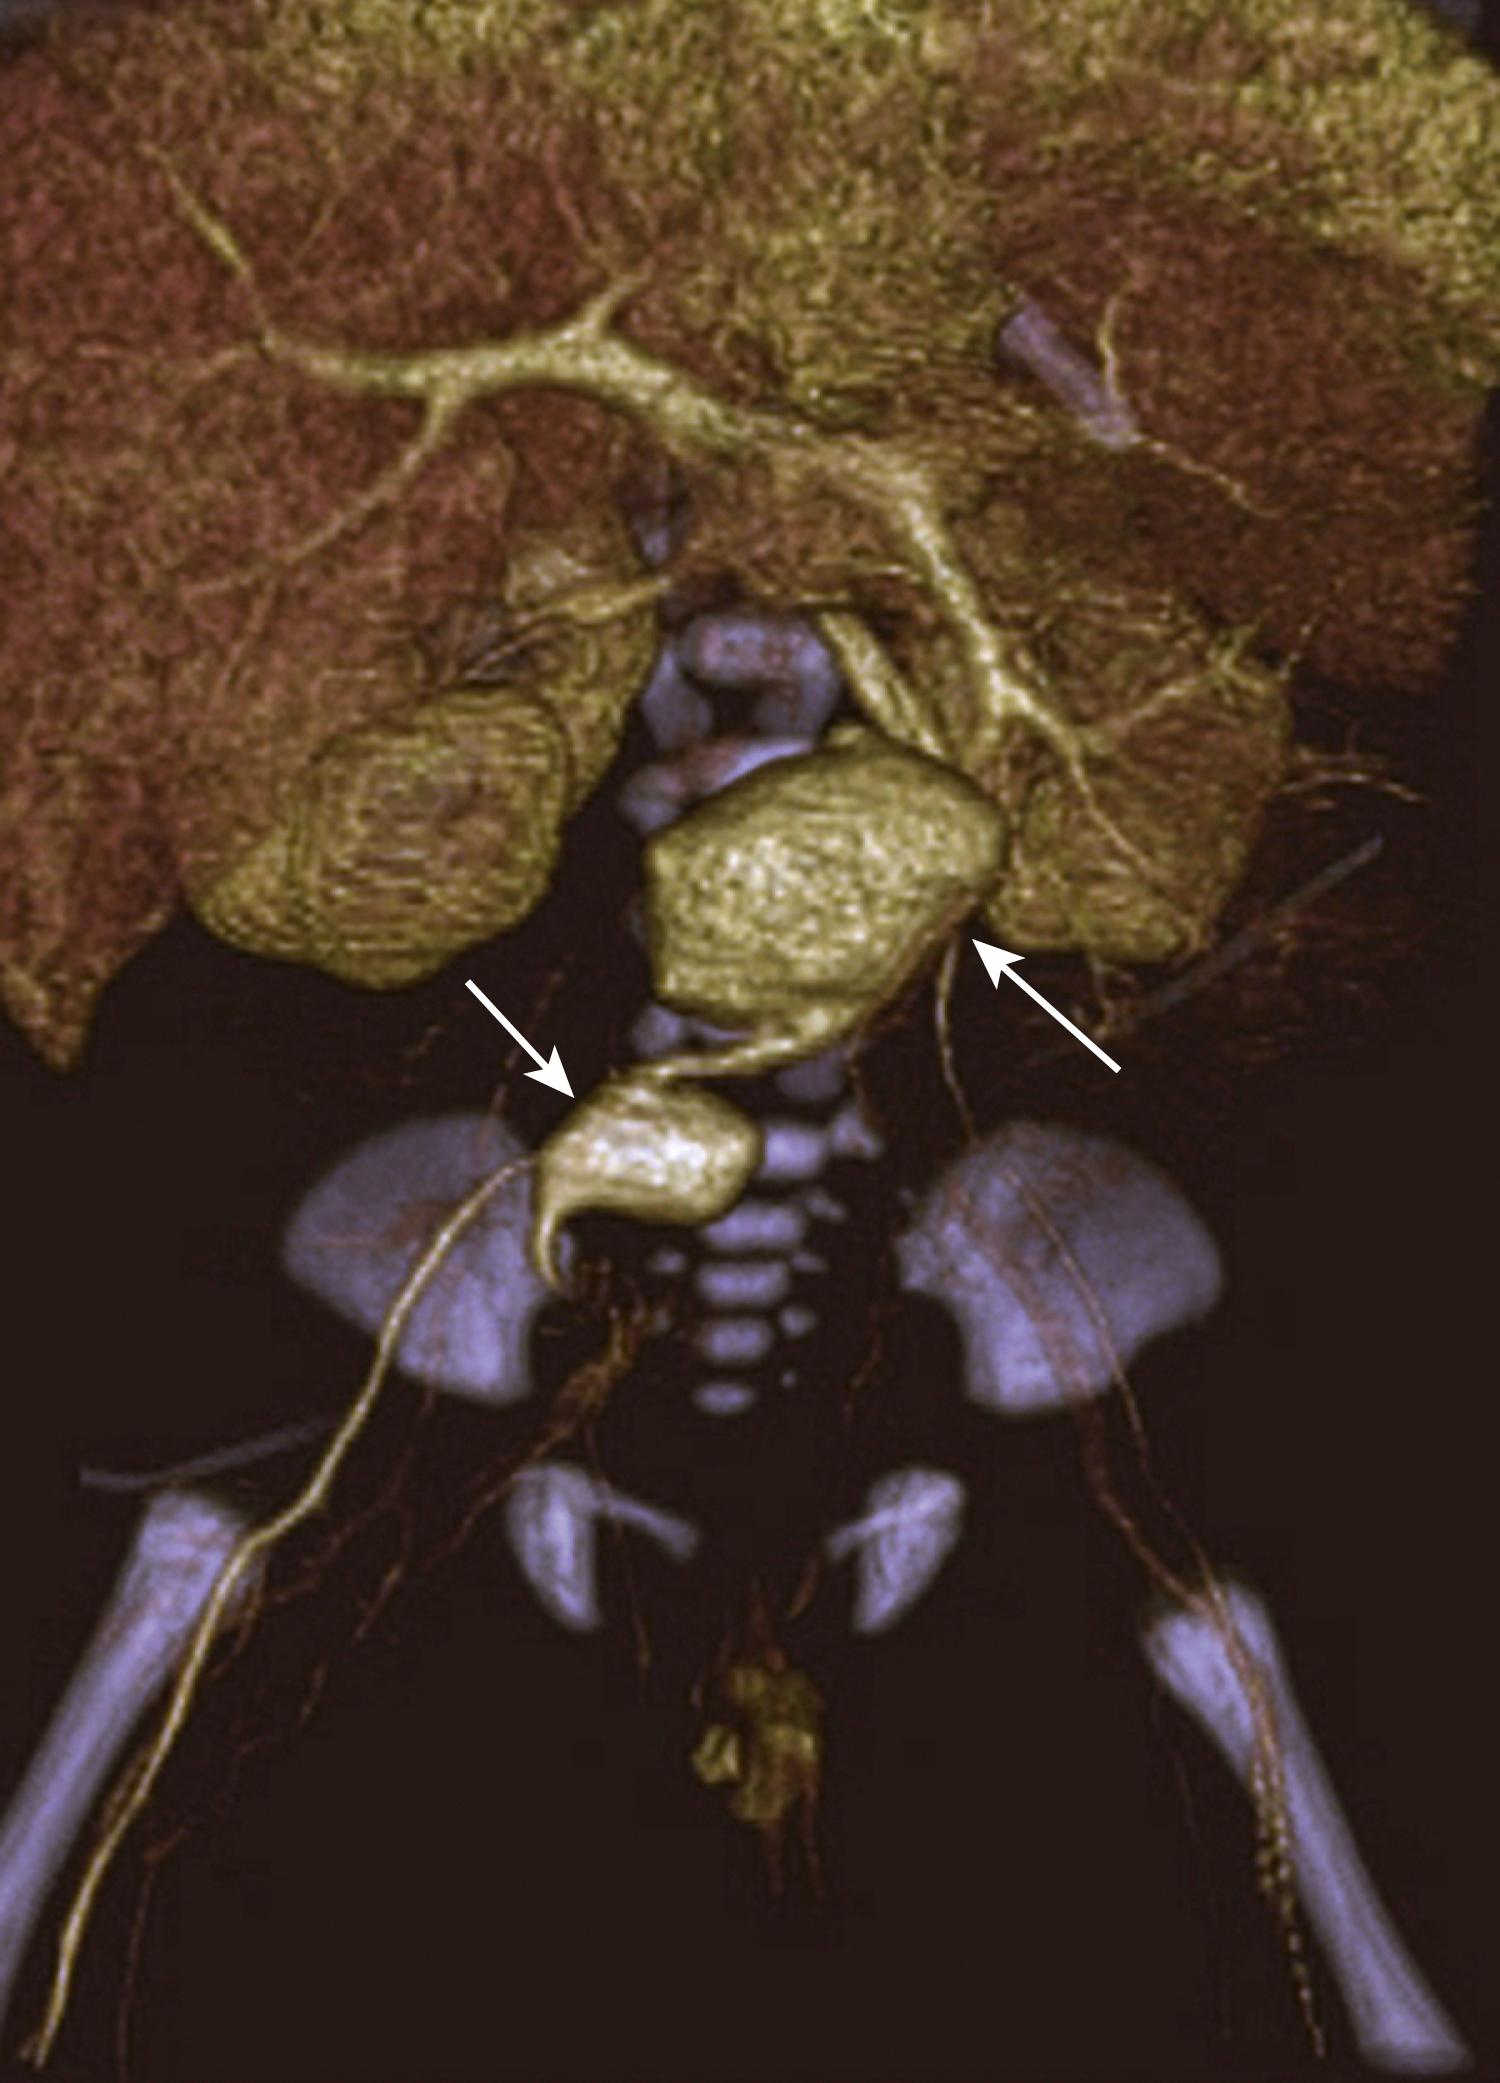 Figure 186.3, Infectious infrarenal abdominal aortic aneurysm (right arrow) and a right iliac artery aneurysm (left arrow) in a 2-week-old associated with infected umbilical catheterization and sepsis (computed tomography angiography).